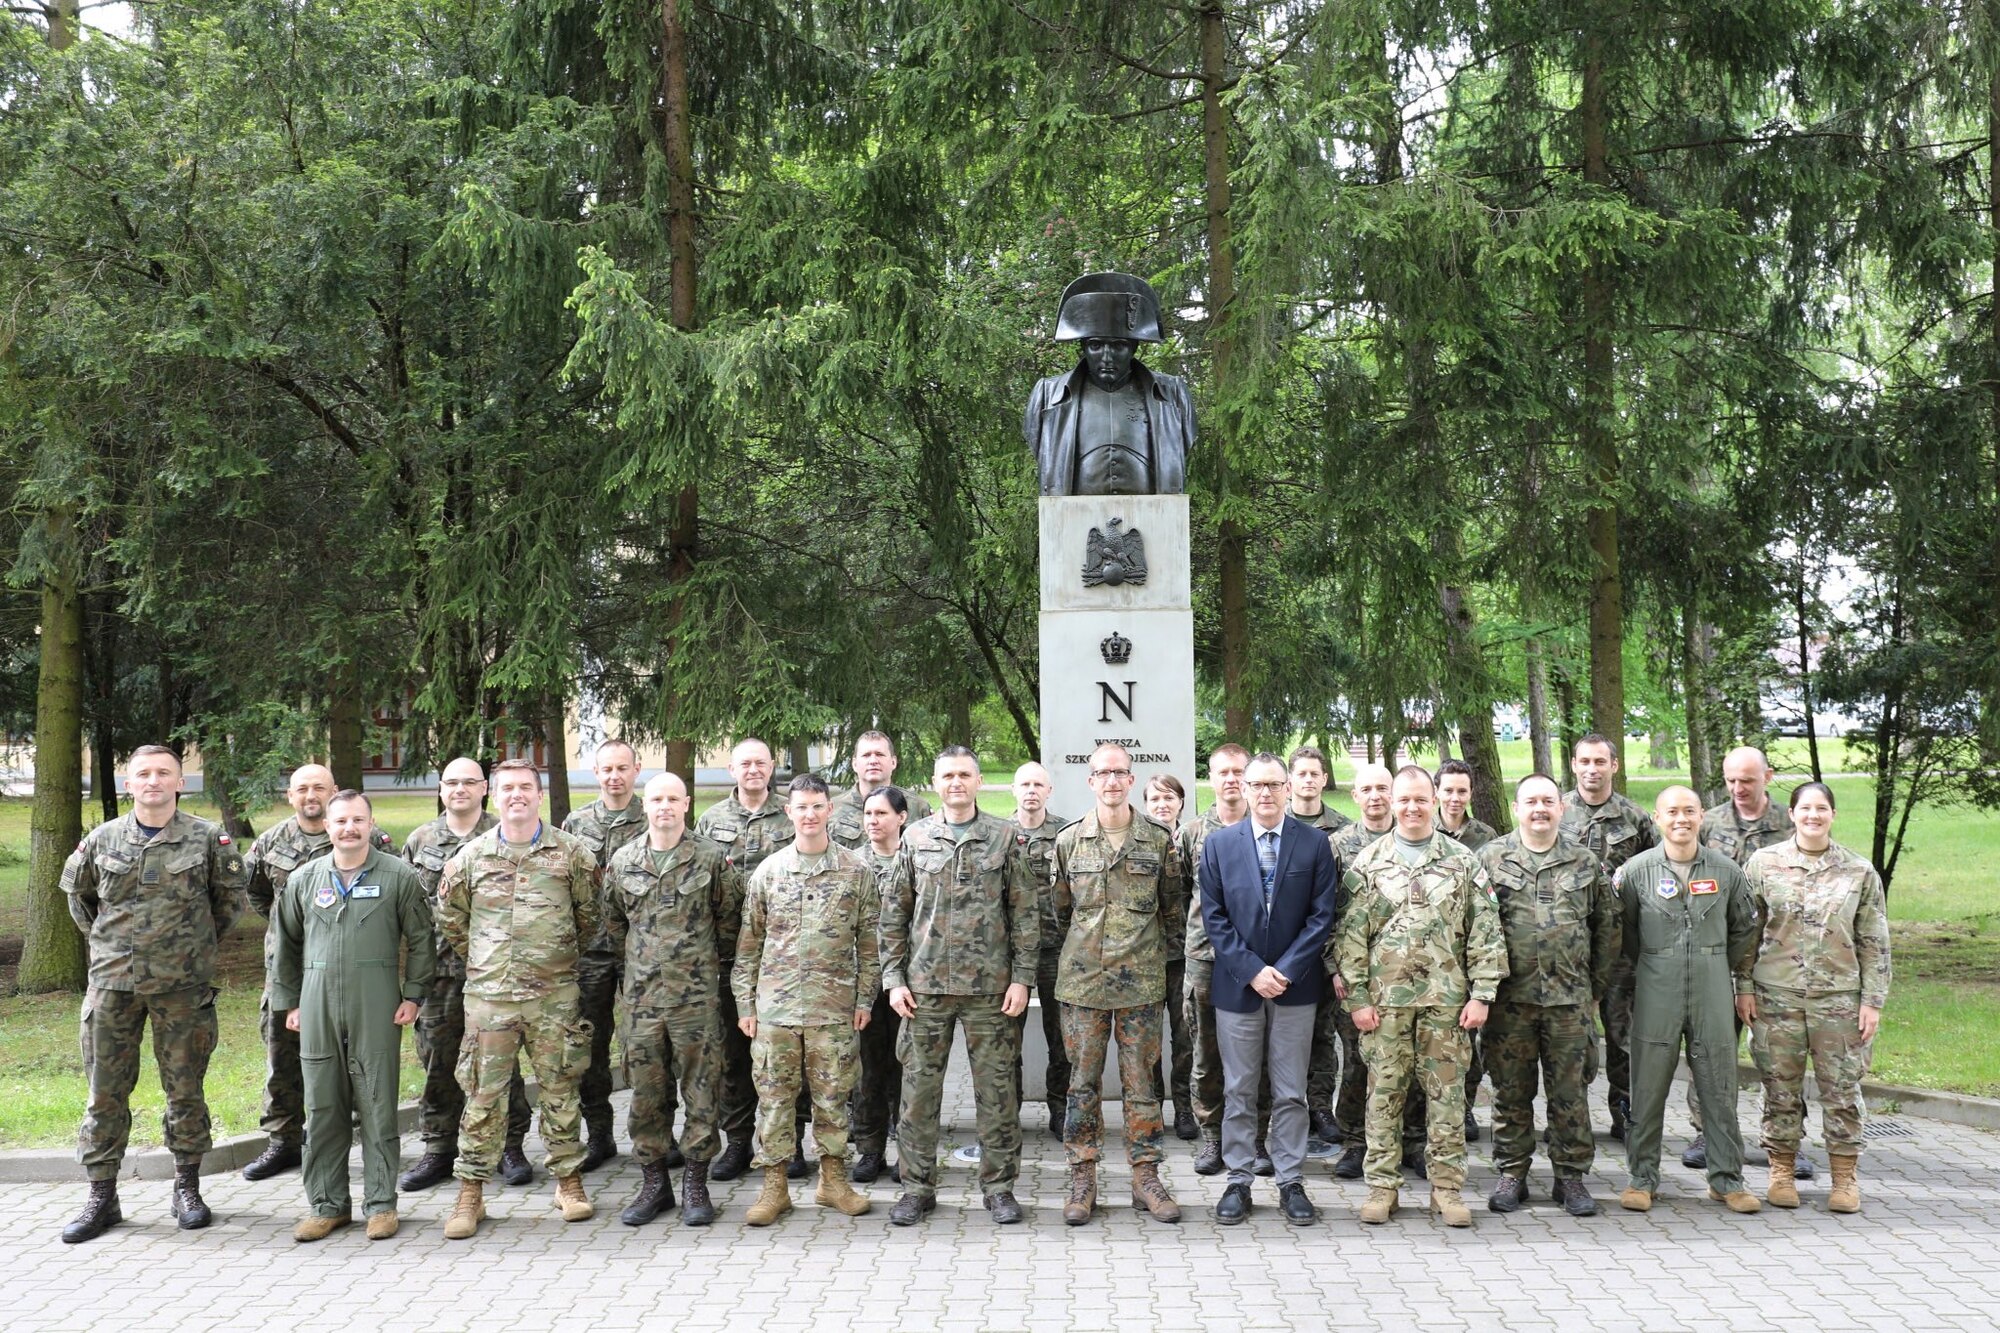 all of the students and faculty who participated in the Air Shield exercise on the campus of the War Studies University (Akademia Sztuki Wojennej) in Warsaw, Poland.